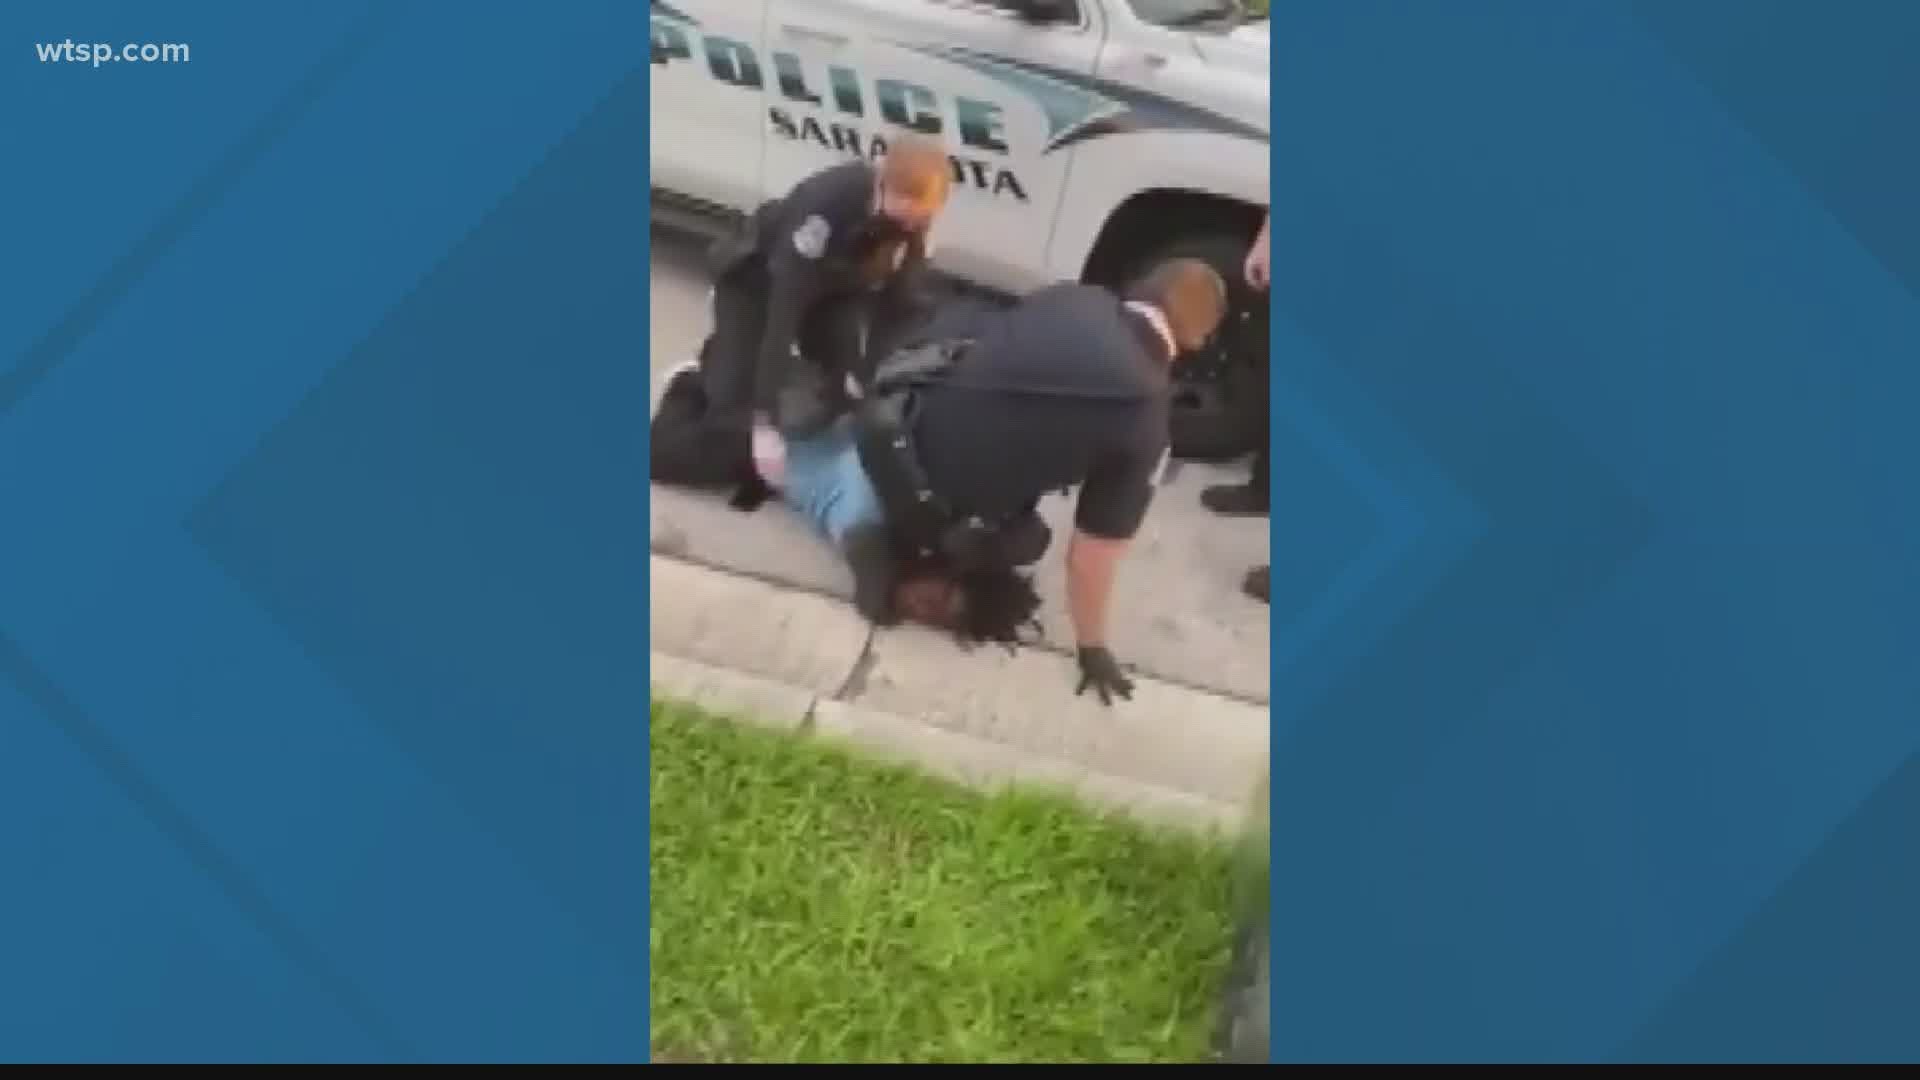 The Sarasota Police Department is investigating after one of its officers was accused of kneeling on the head and neck of a man being arrested.